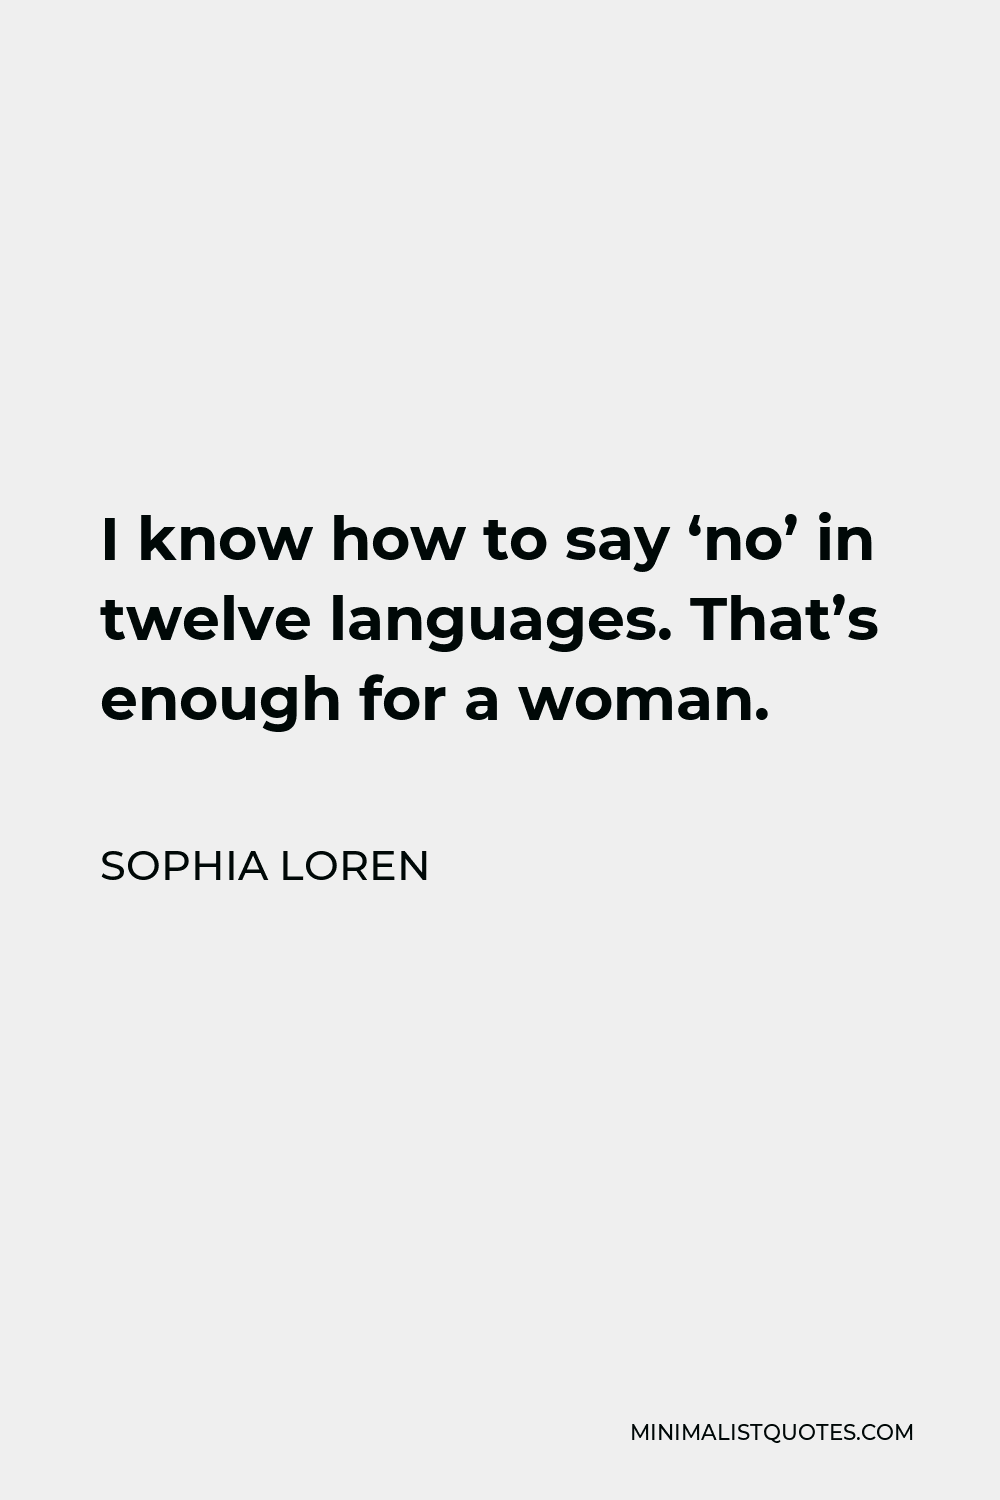 Sophia Loren Quote - I know how to say ‘no’ in twelve languages. That’s enough for a woman.